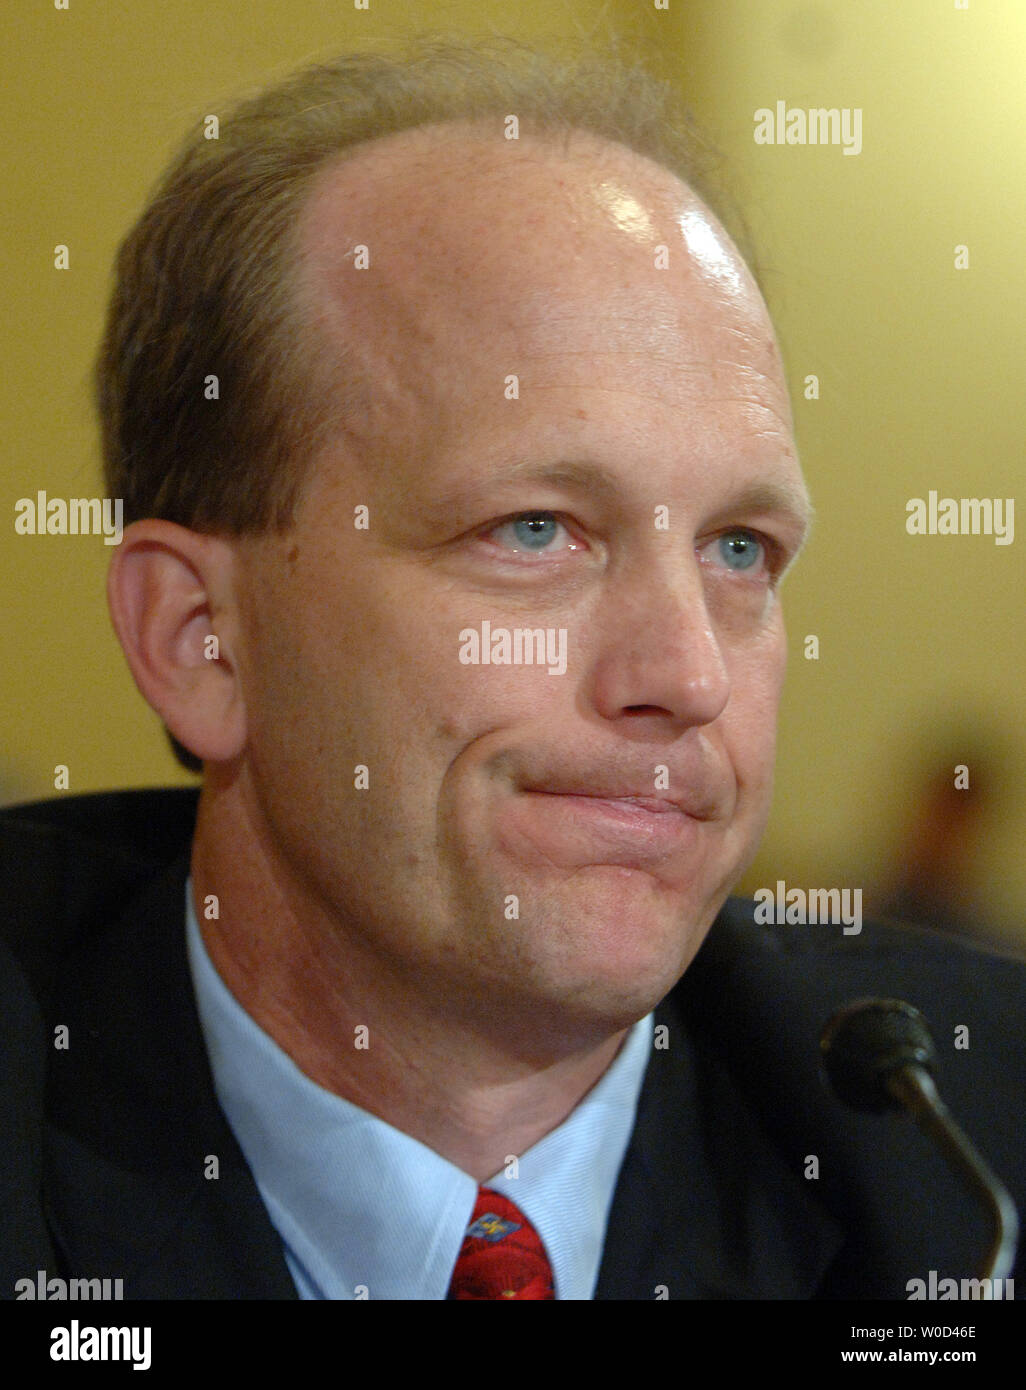 Gregory Kutz, managing director of forensic audits and special investigations, Government Accountability Office, testifies before a House Homeland Security Investigations subcommittee hearing investigating waste, fraud and abuse in the aftermath of Hurricane Katrina on Capitol Hill in Washington on June 14, 2006.   (UPI Photo/Roger L. Wollenberg) Stock Photo